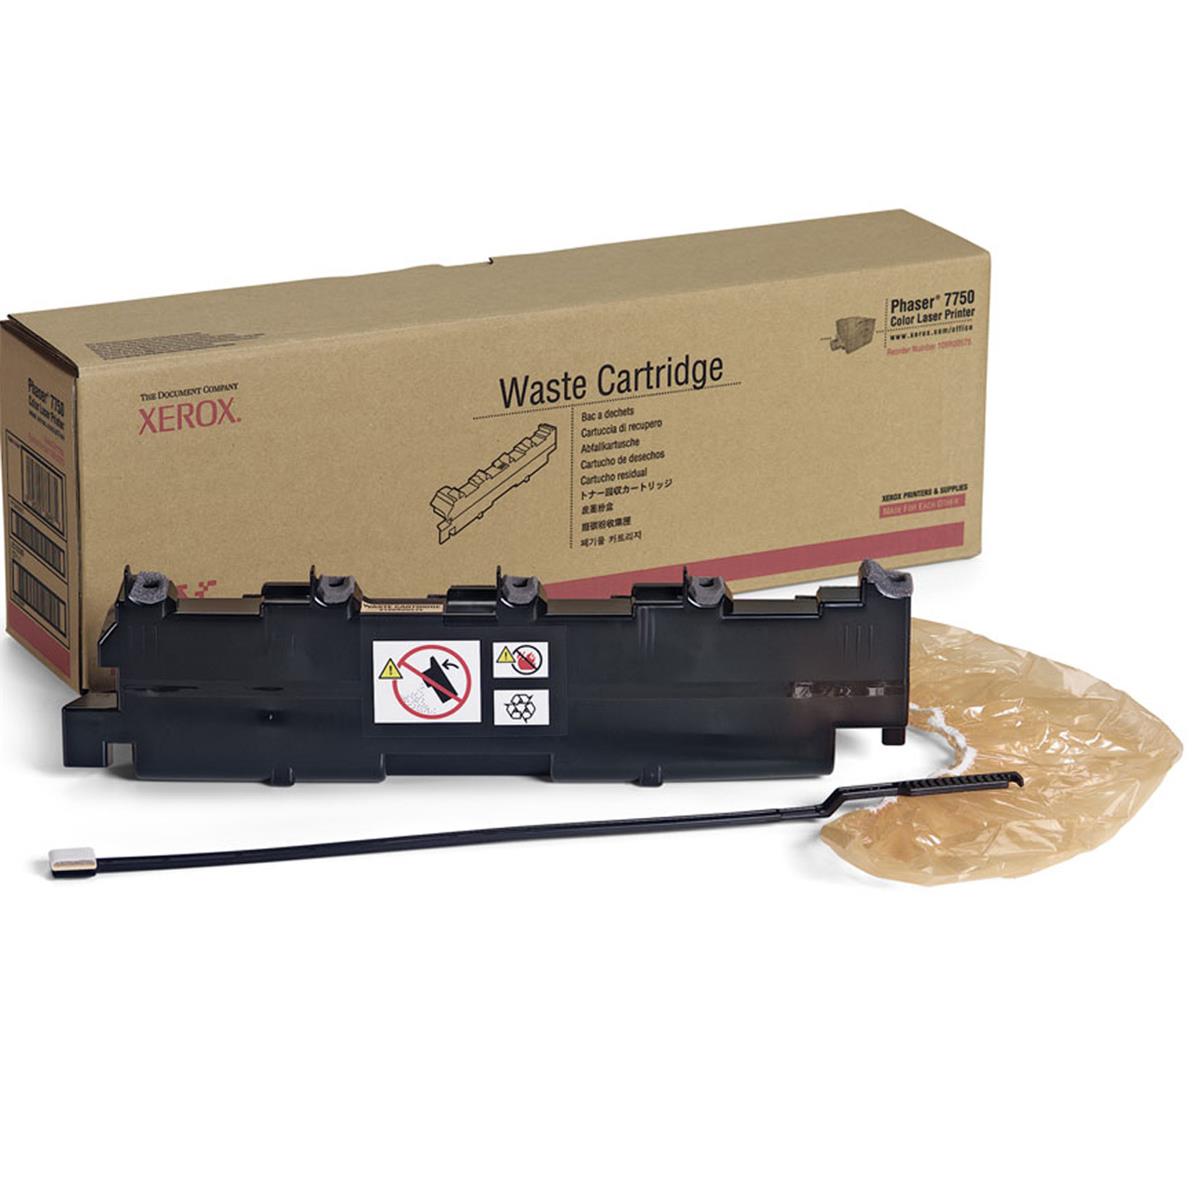 

Xerox Waste Cartridge for Phaser 7750, 7760